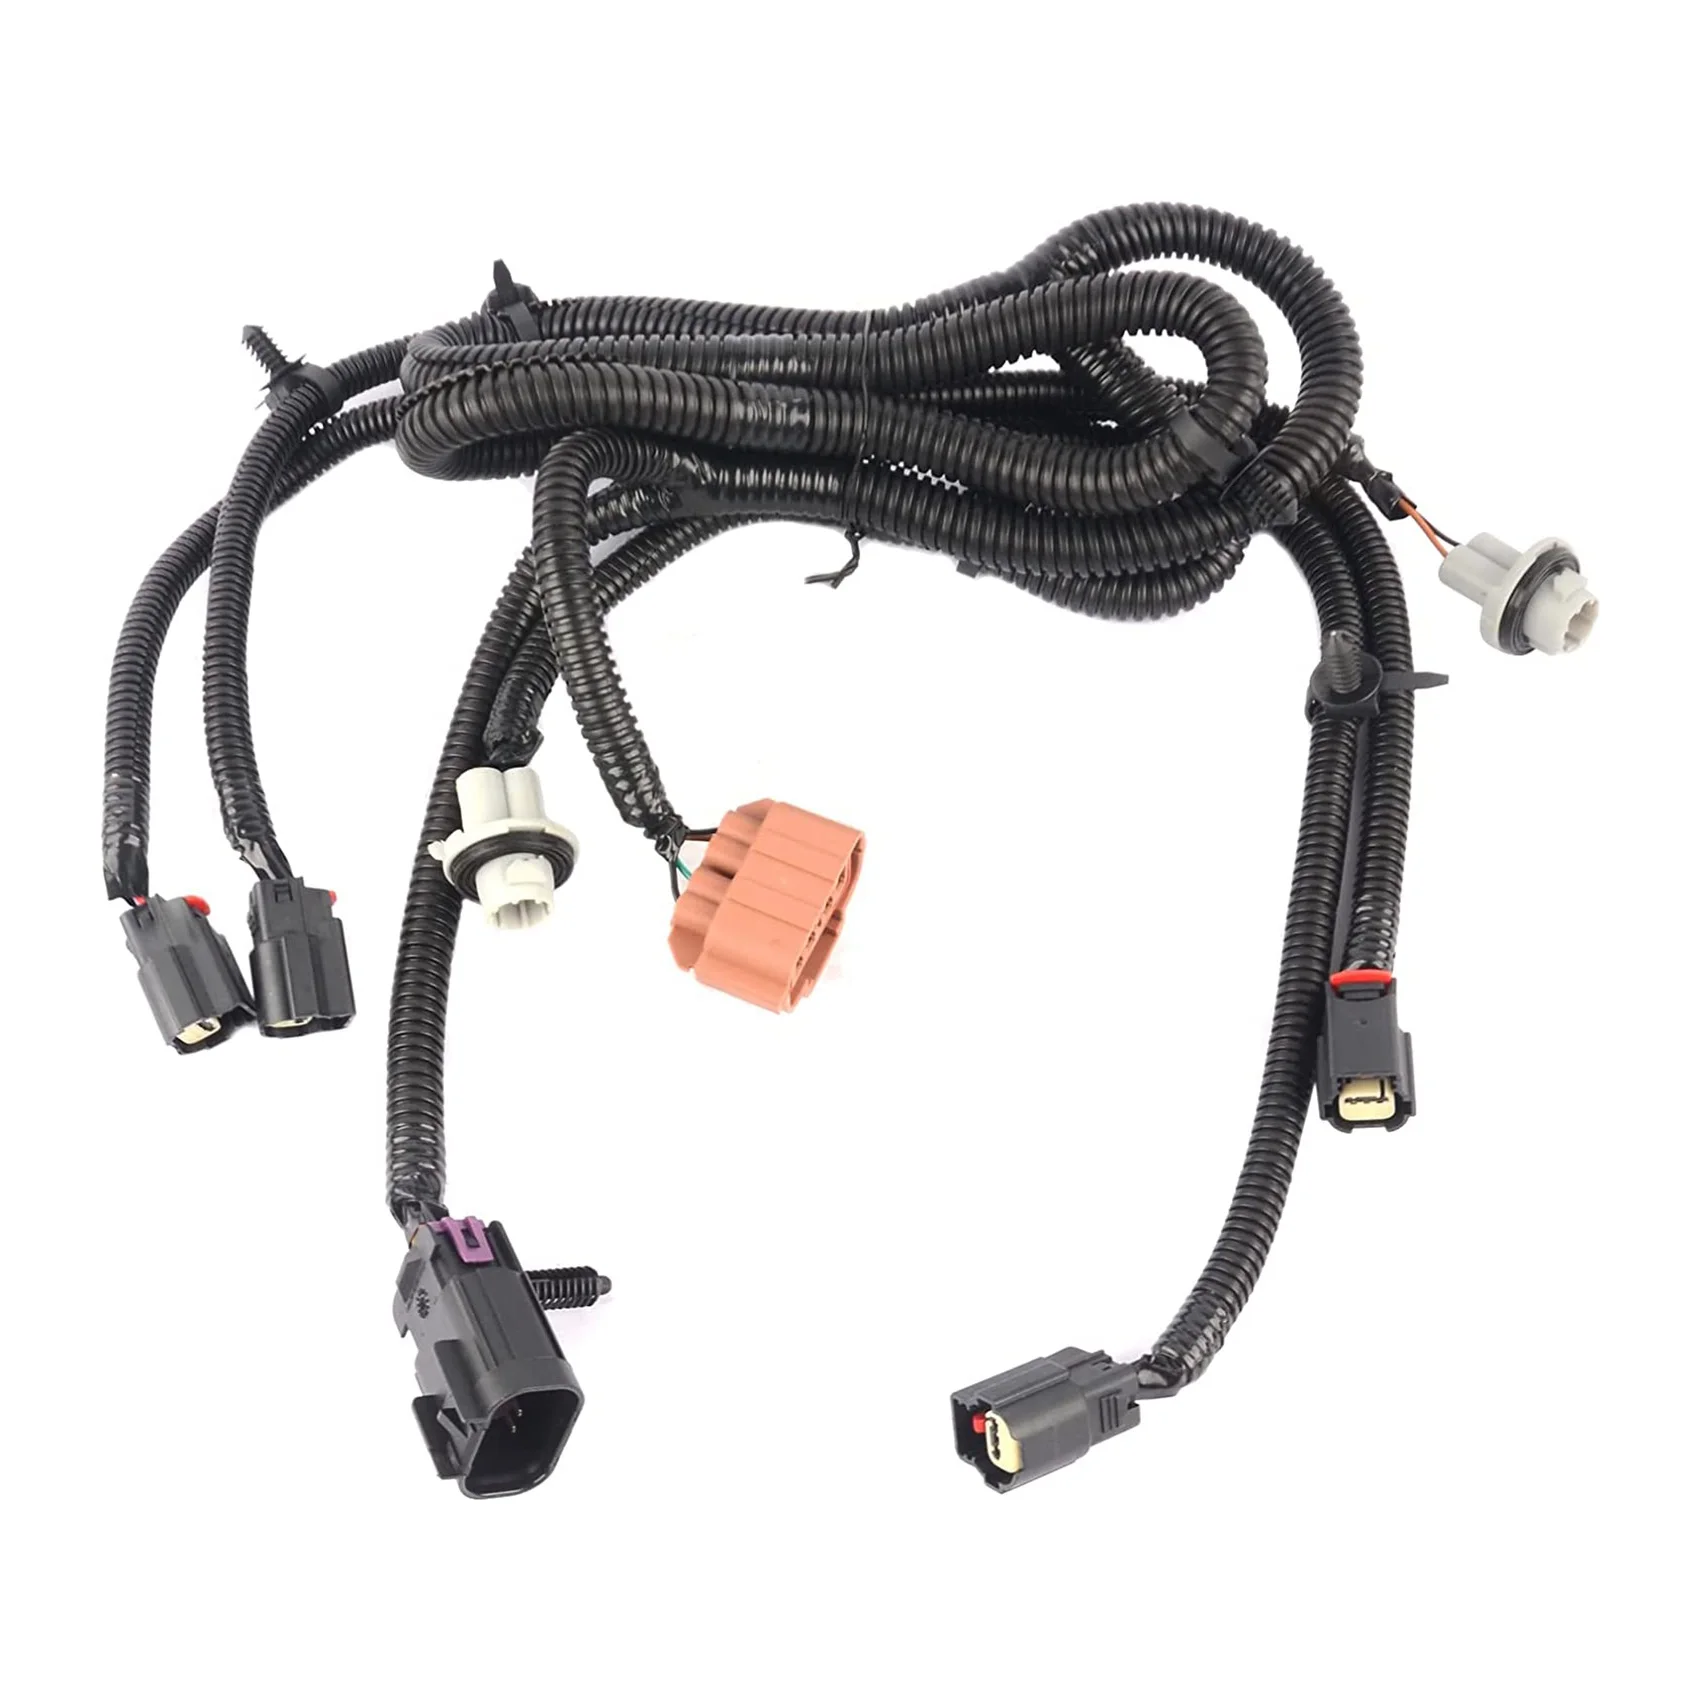 

For 2007-14 Park Assist Wiring Harness with License Light